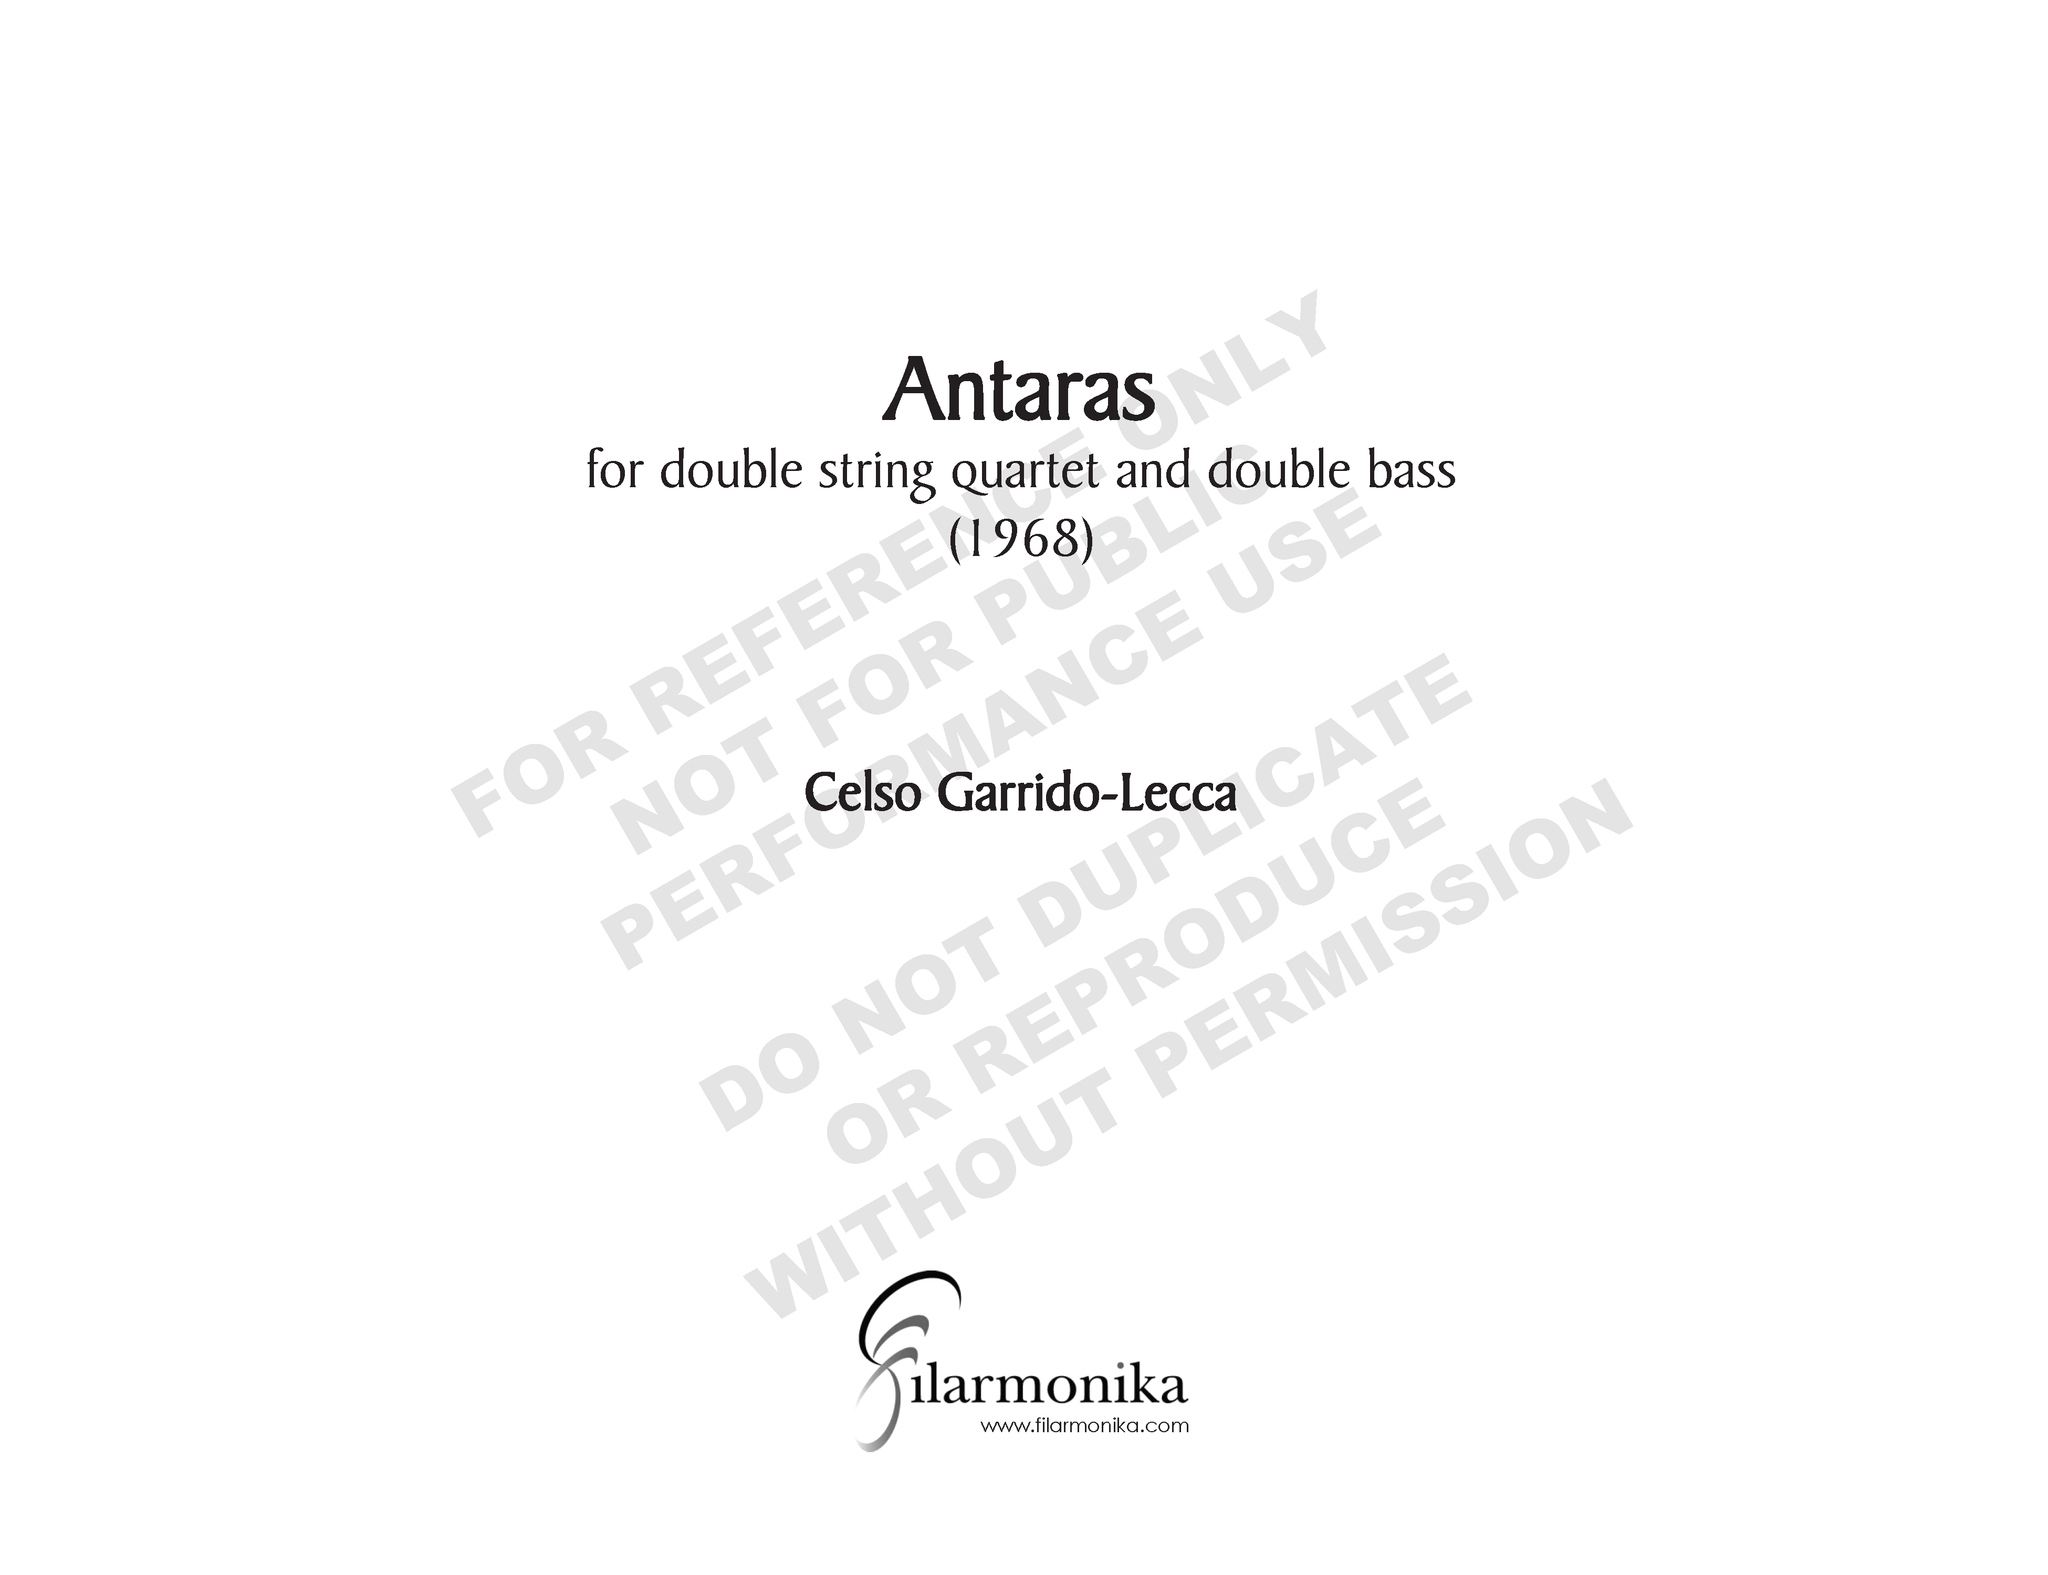 Antaras, for double string quartet and double bass